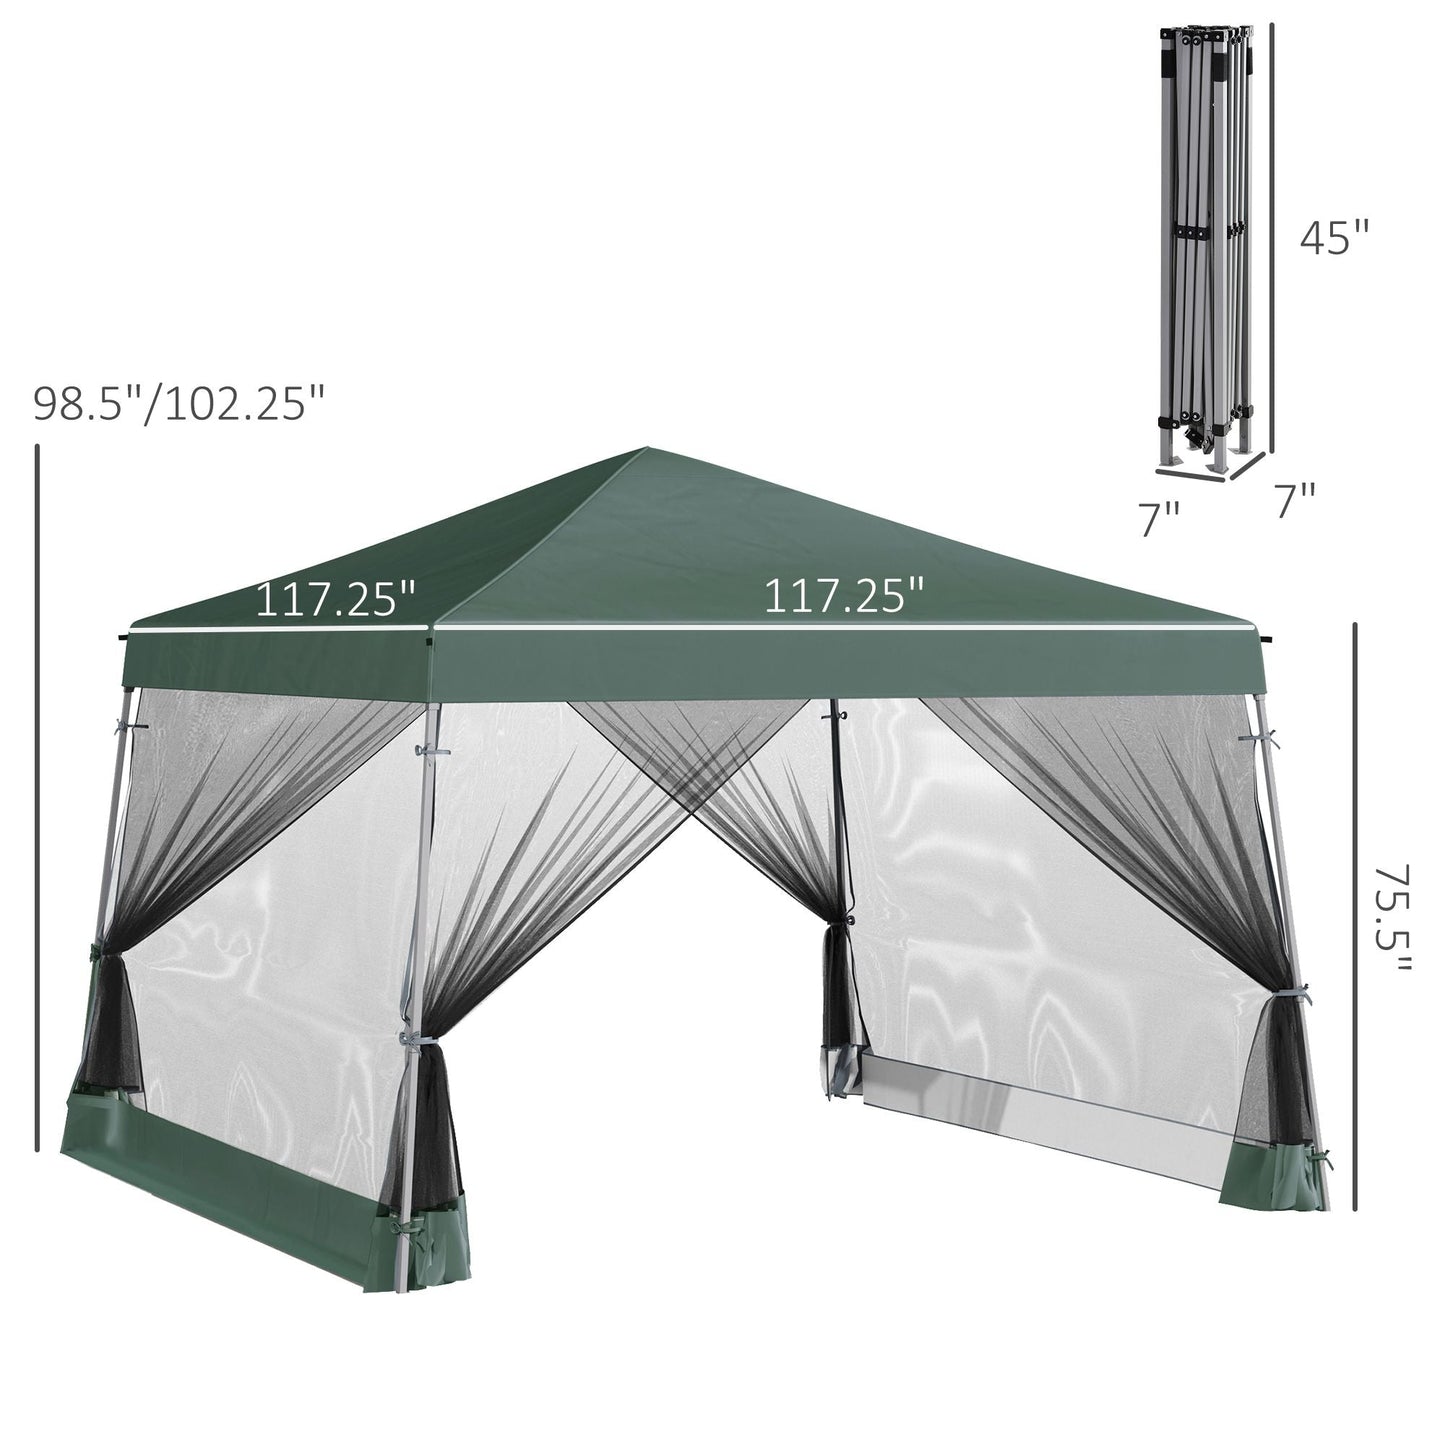 Outdoor and Garden-10' x 10' Foldable Pop Up Canopy Tent, with Carrying Bag, Mesh Sidewalls and 3-Level Adjustable Height for Outdoor, Garden - Outdoor Style Company